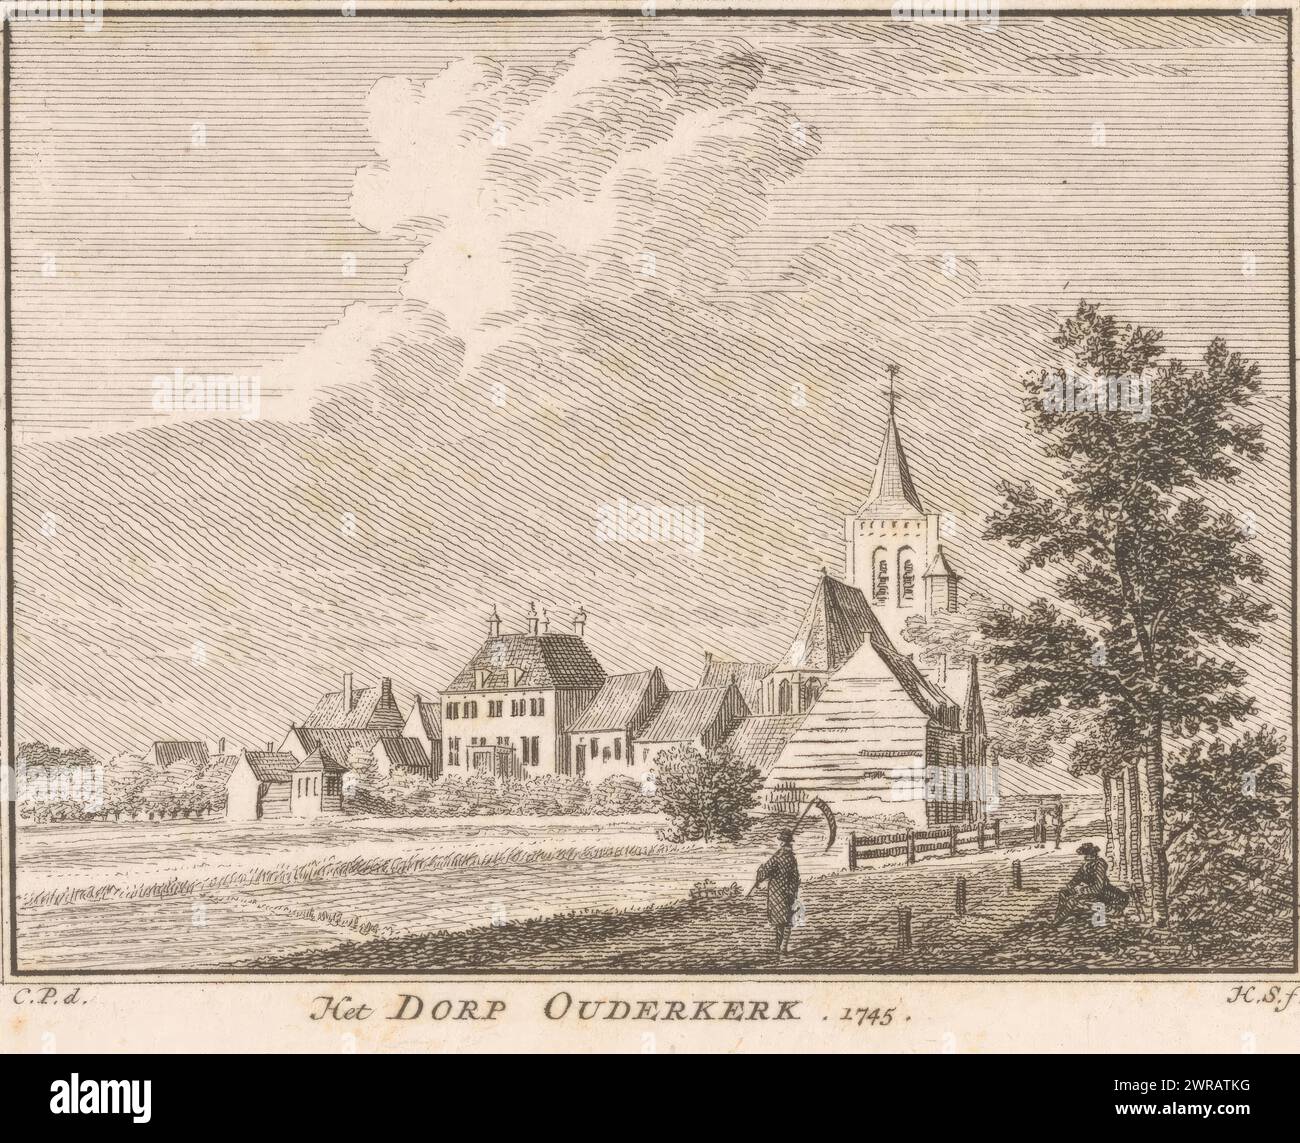 View of a street in Nieuwerkerk, 1745, Het Dorp Nieuwerkerk in Duiveland. 1745 (title on object), View of a street in the village of Nieuwerkerk on Schouwen-Duiveland, with the church at the end. In the situation around 1745., print maker: Hendrik Spilman, after drawing by: Cornelis Pronk, Haarlem, 1754 - 1792, paper, etching, height 79 mm, width 103 mm, print Stock Photo